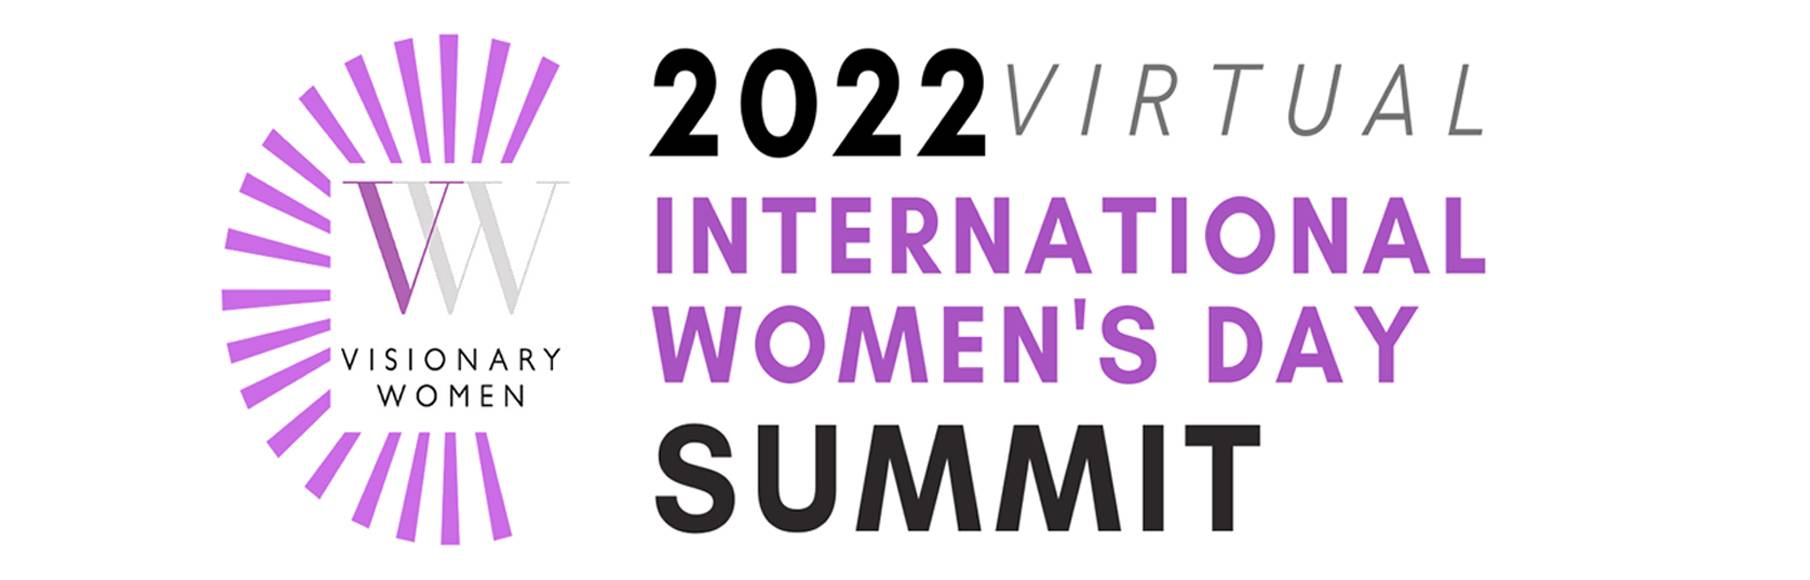 Behind-the-Scenes of Visionary Women’s Star-Studded International Women’s Day Summit